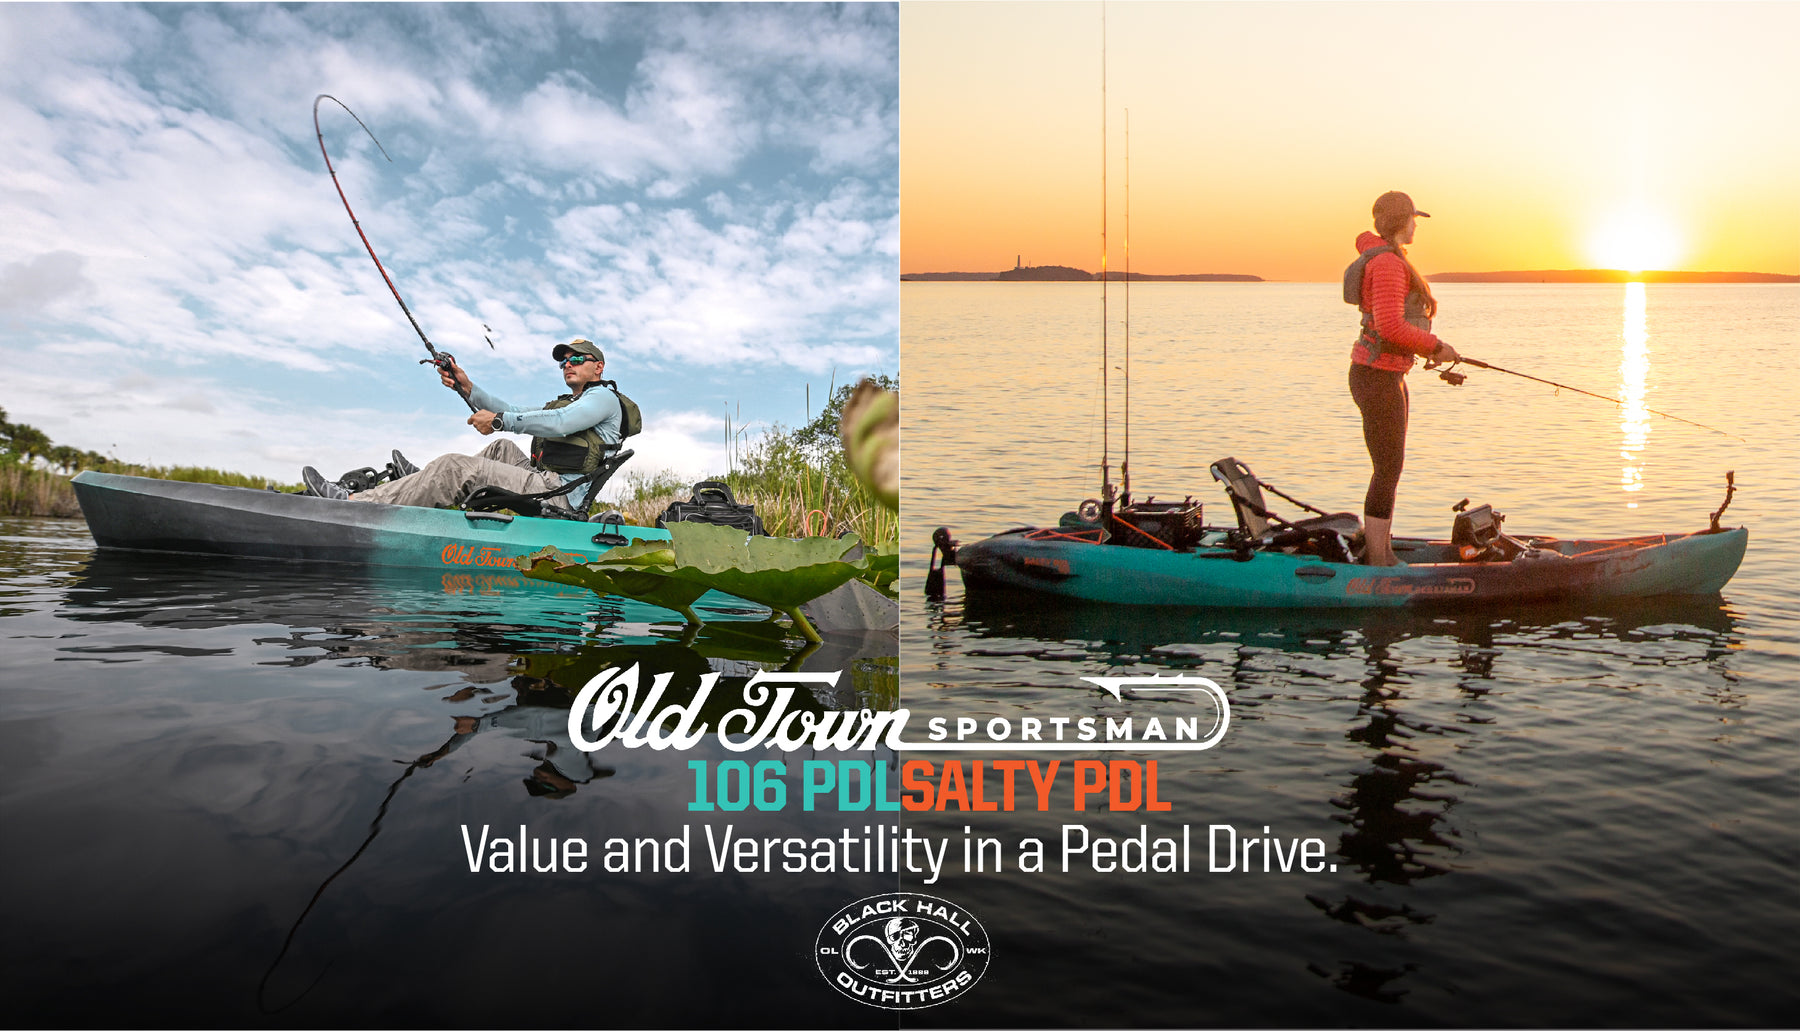 Versatile Pedal Kayaks at a VALUE Price: Meet the Old Town Sportsman Salty PDL and 106 PDL